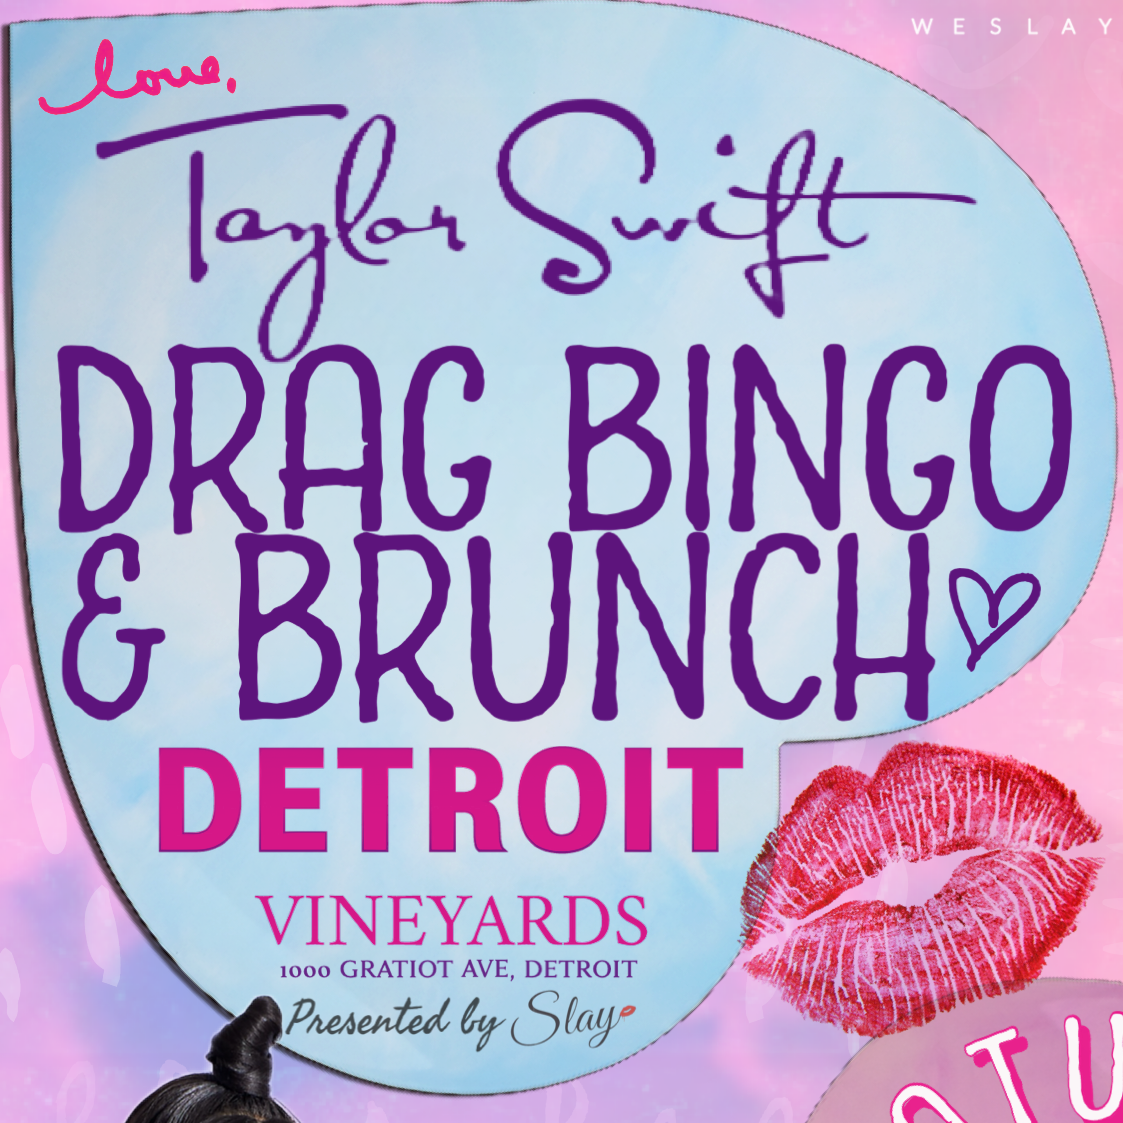 Featured image for “Taylor Swift Drag Bingo and Brunch”